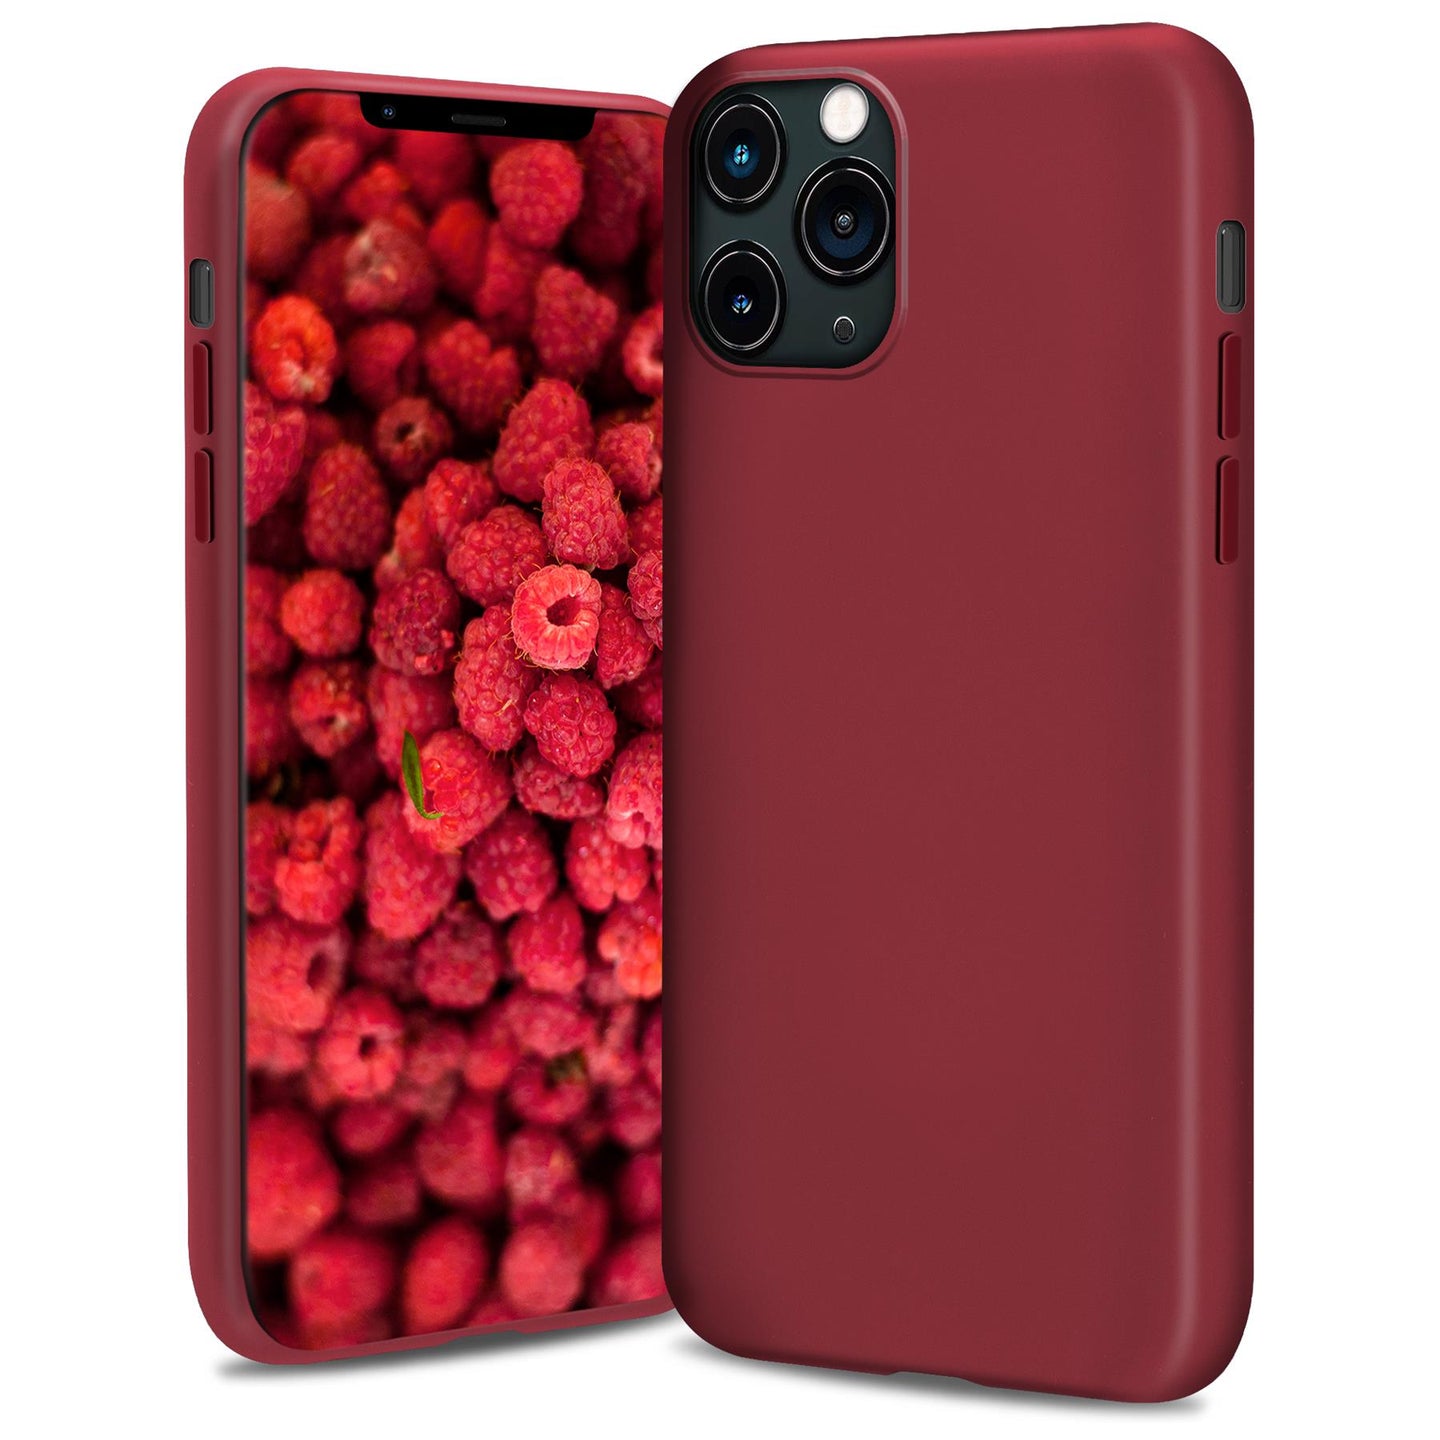 Moozy Lifestyle. Silicone Case for iPhone 13 Pro Max, Vintage Pink - Liquid Silicone Lightweight Cover with Matte Finish